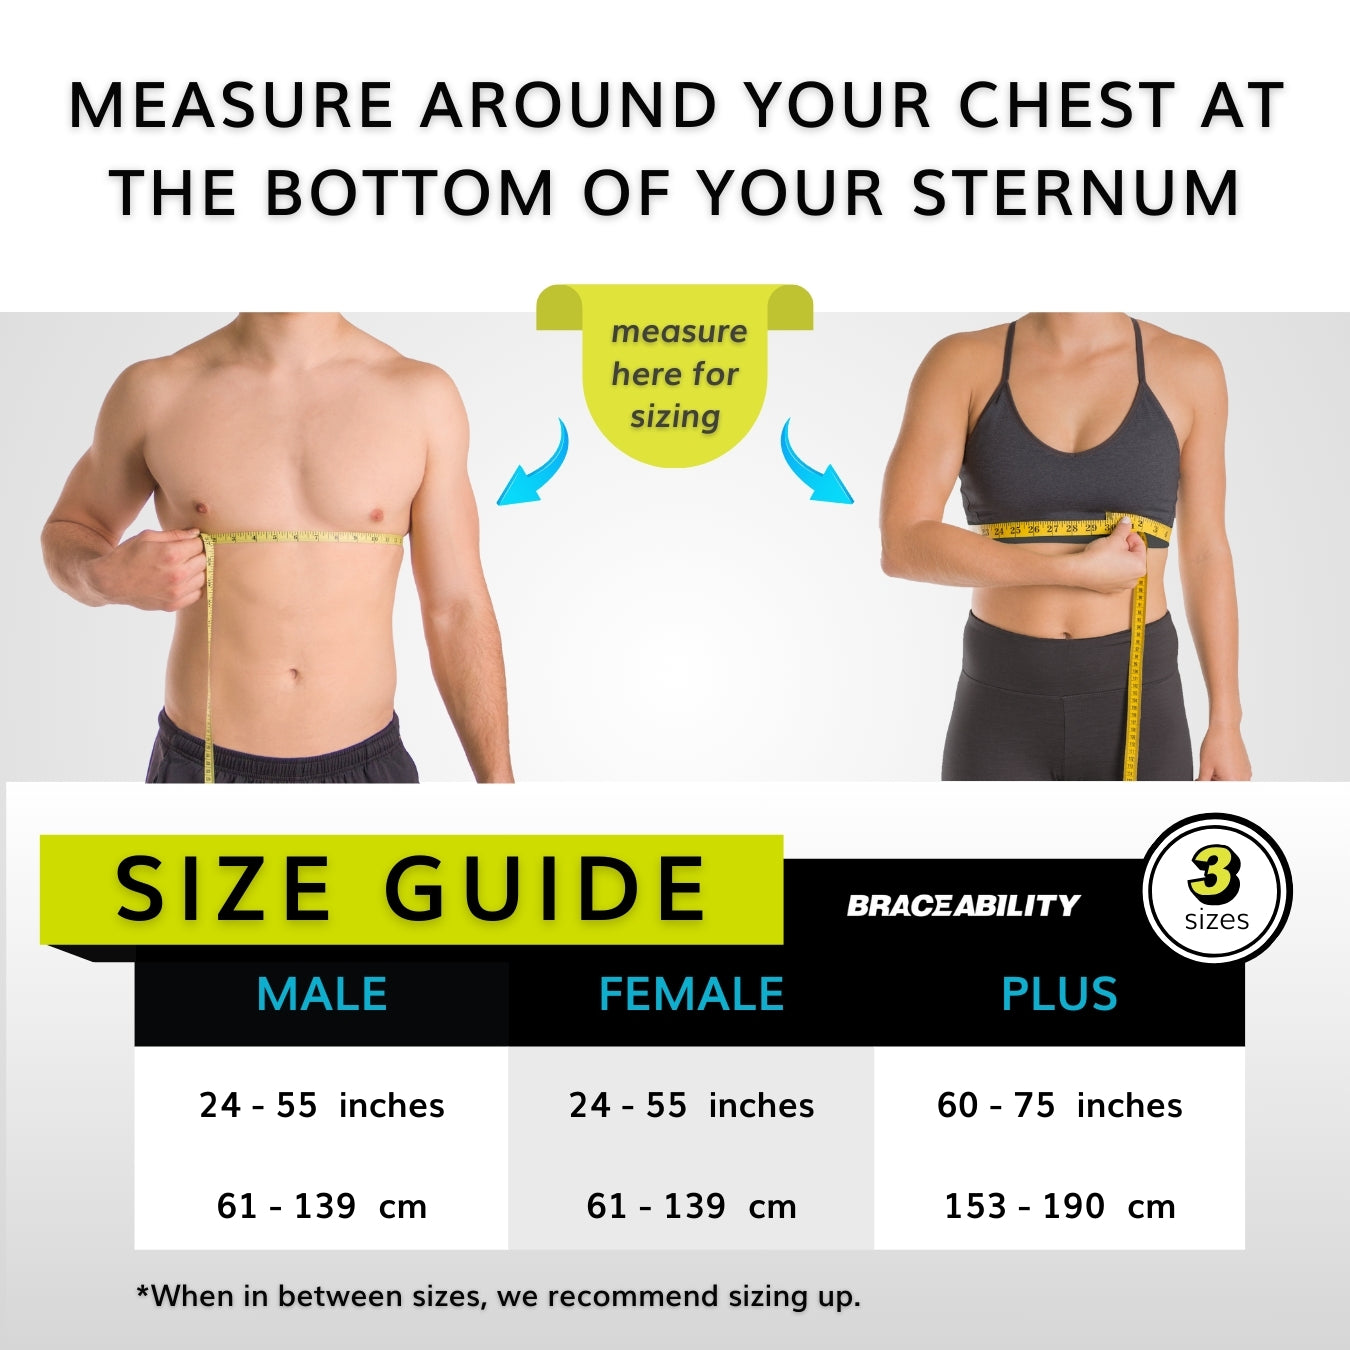 The sizing chart for the broken rib brace three fit options fitting men, women, and plus size